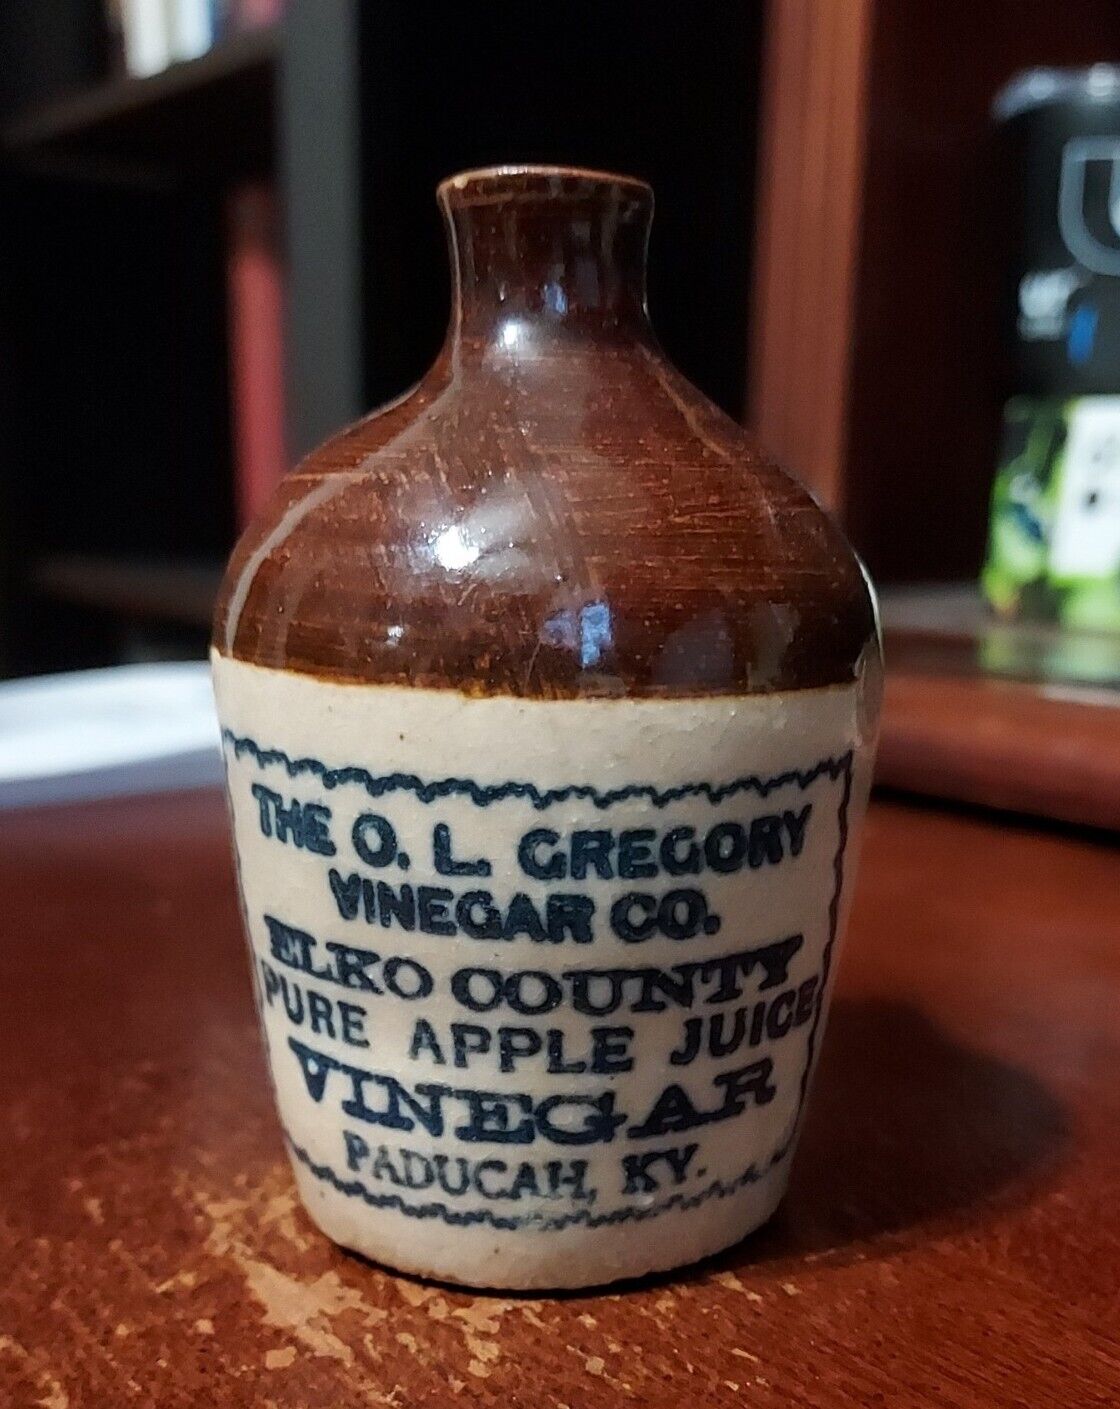 Compliments of The O.L. Gregory Vinegar Co. Paducah, KY. Miniature Stoneware Jug